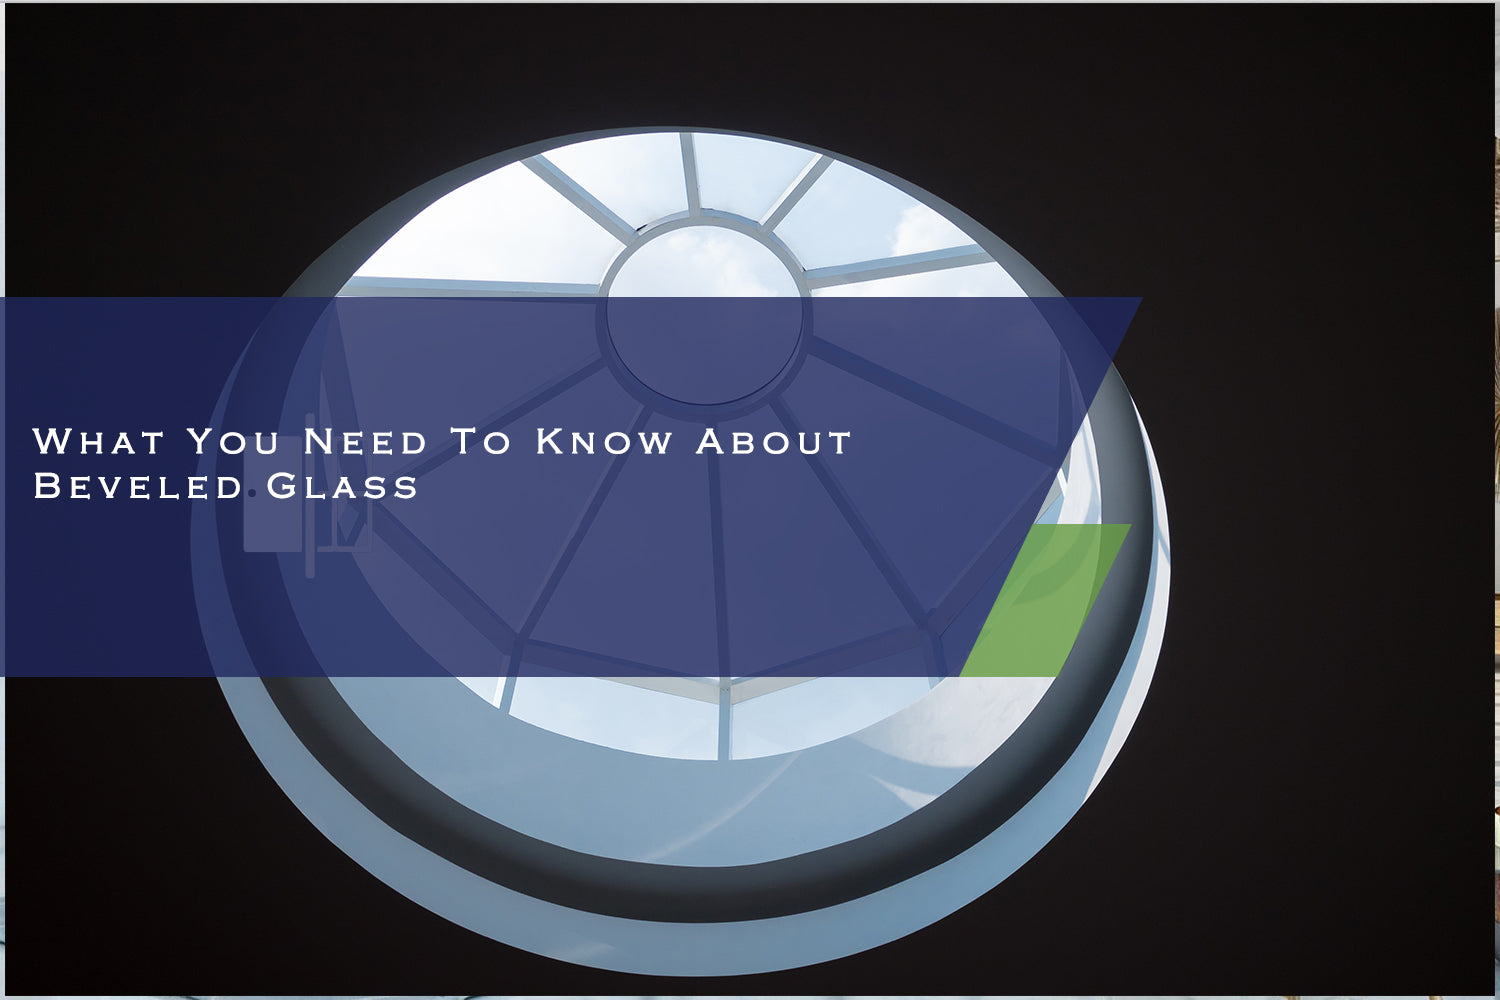 What You Need To Know About Beveled Glass